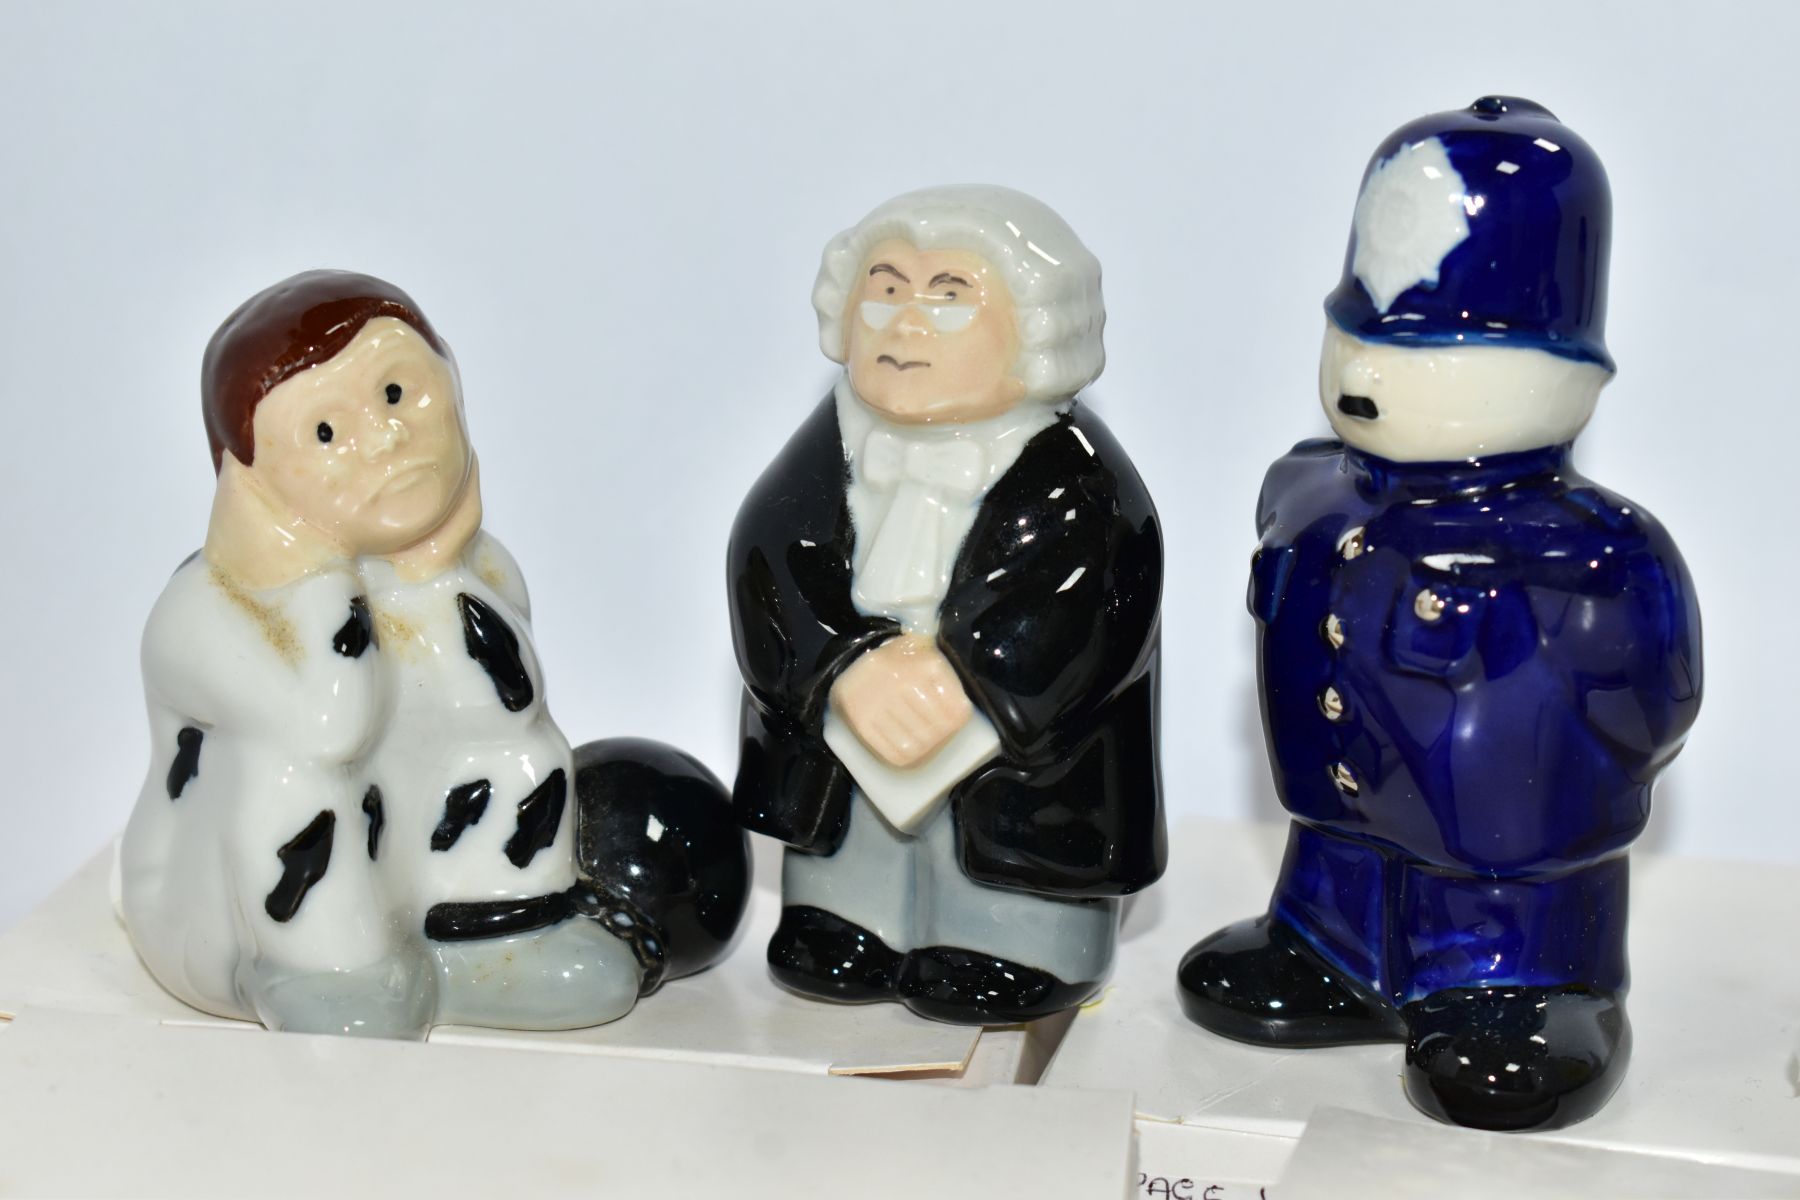 SIX BOXED WADE E AND A.CROMPTON FIGURES FROM THE LONG ARM OF THE LAW SERIES 1993-95 comprising The - Image 3 of 4